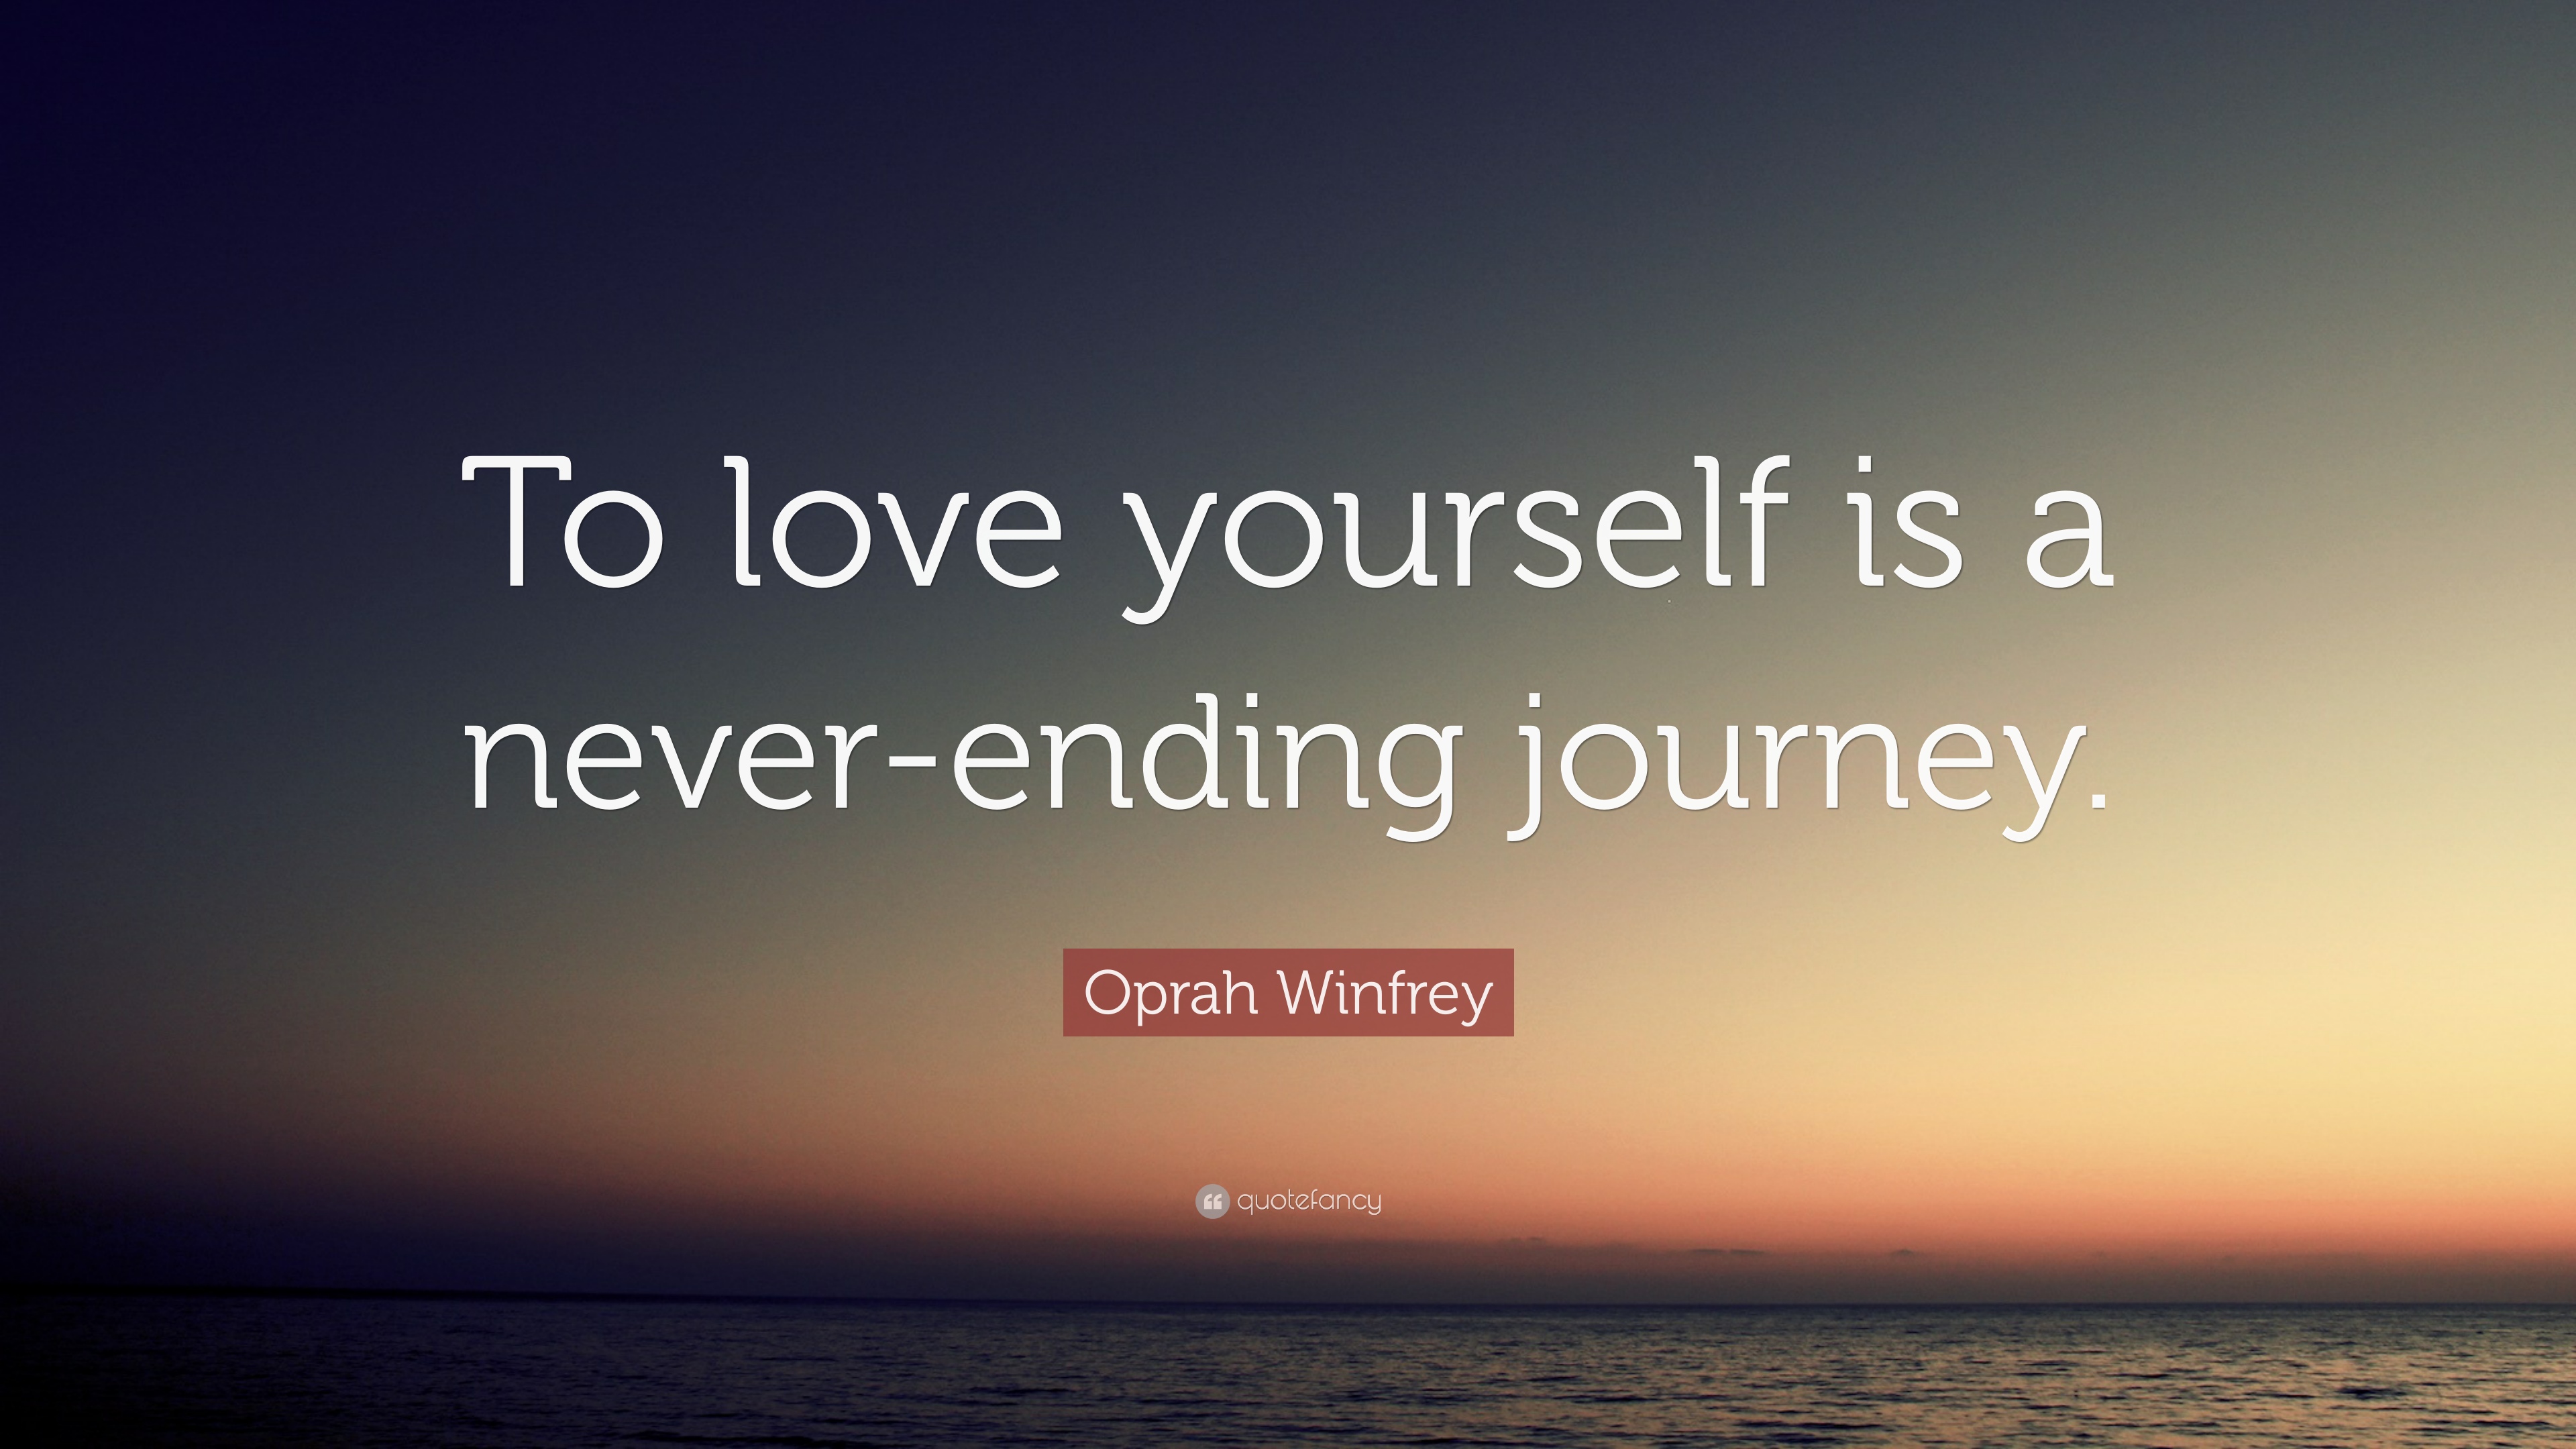 Oprah Winfrey Quote: “To Love Yourself Is A Never Ending Journey